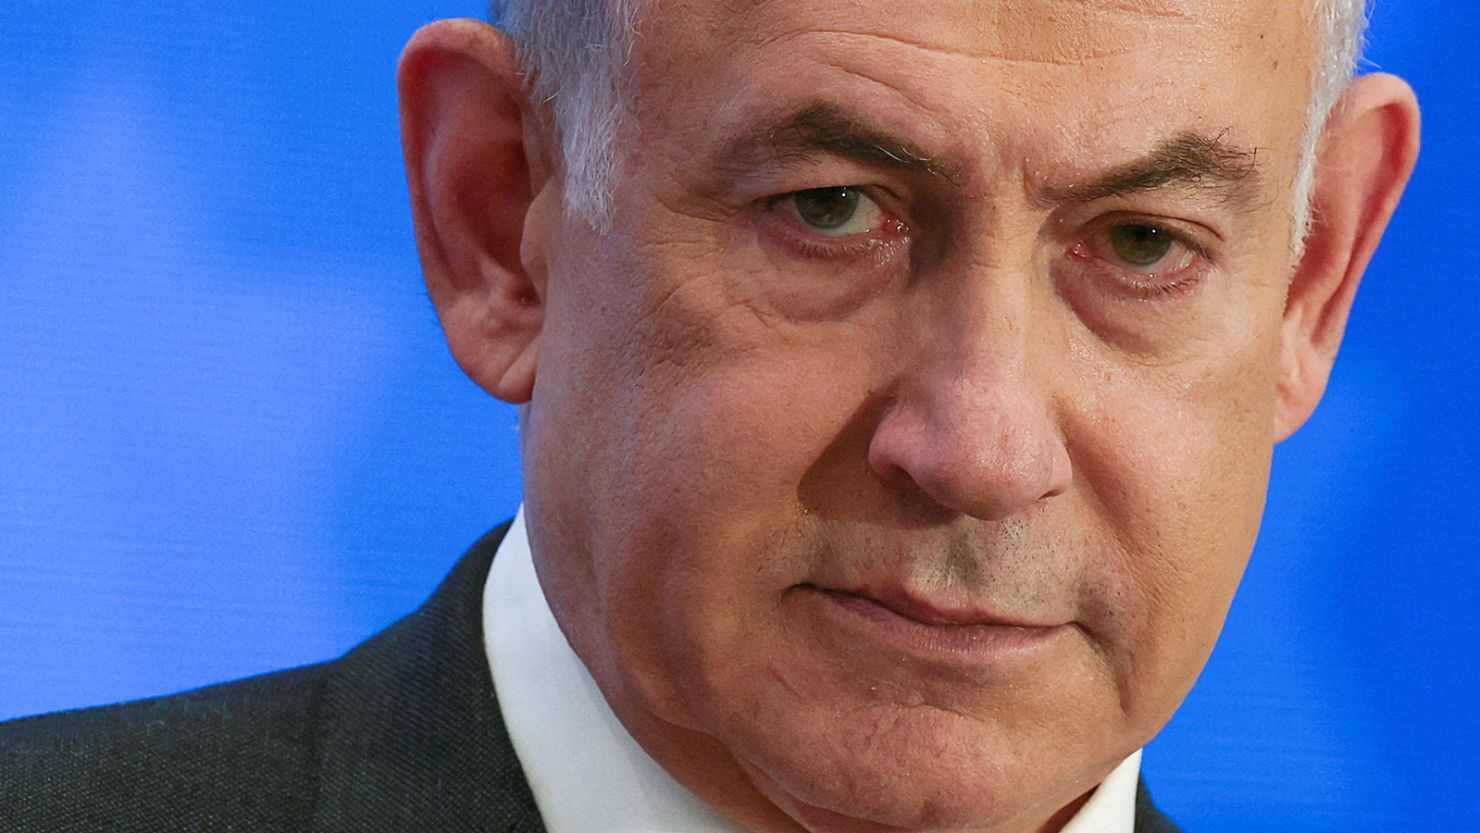 Netanyahu: "Israel will stand alone if it has to"